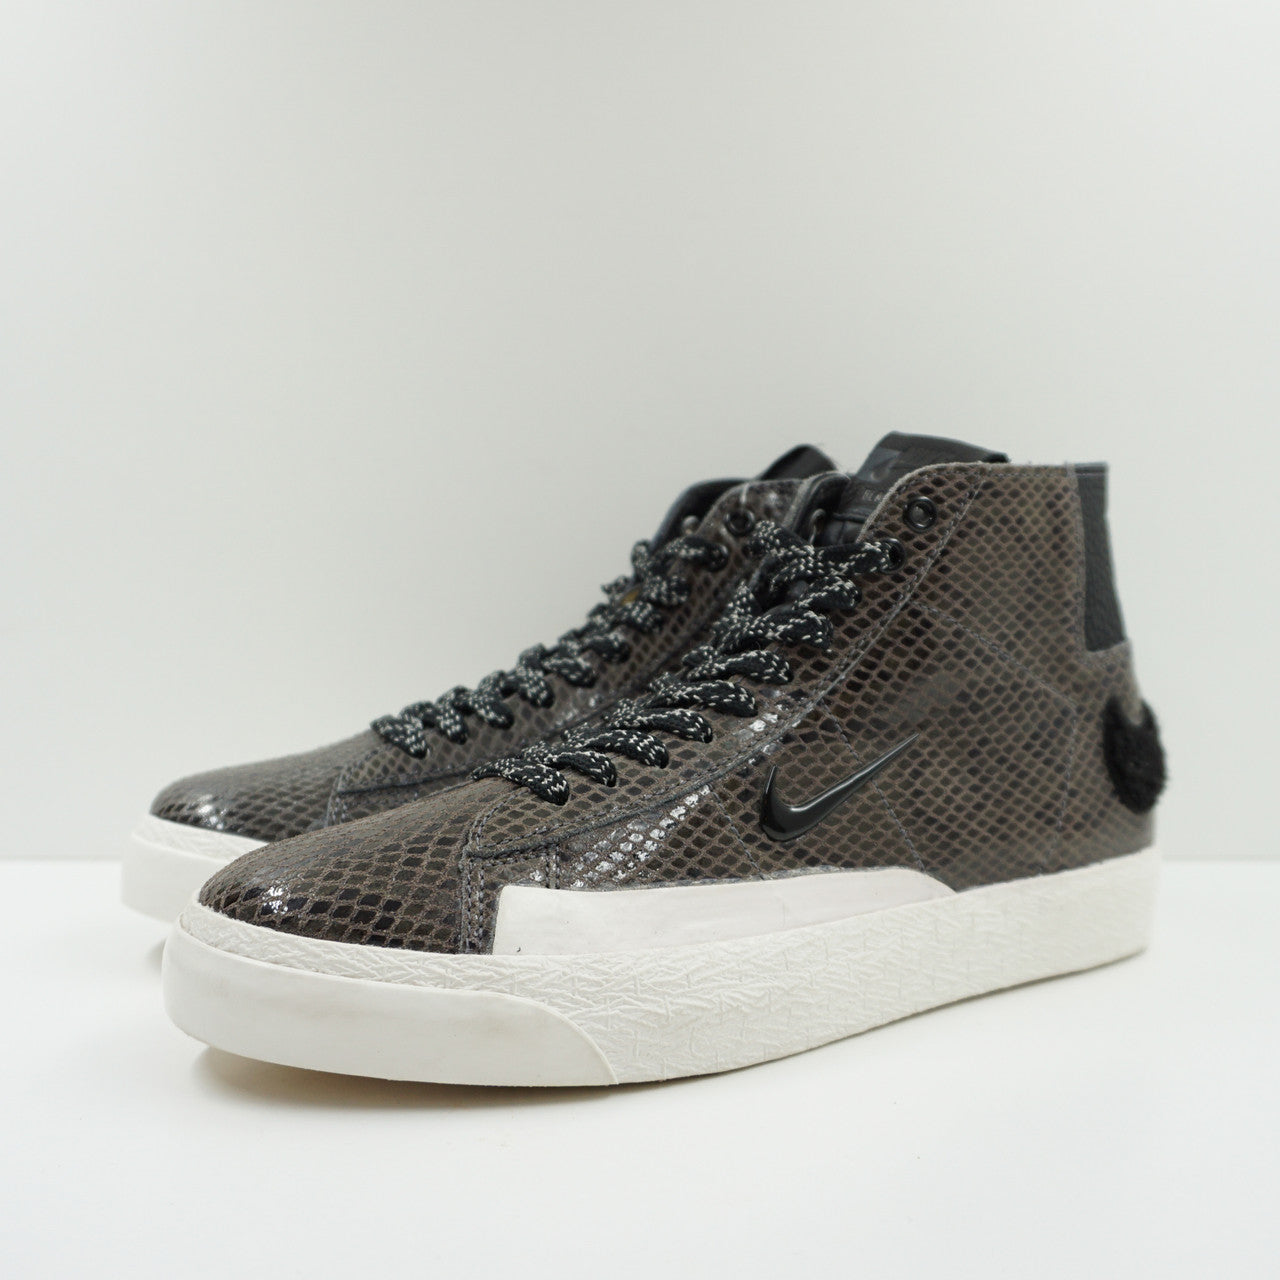 Nike SB Blazer Mid QS Soulland (Friends and Family)